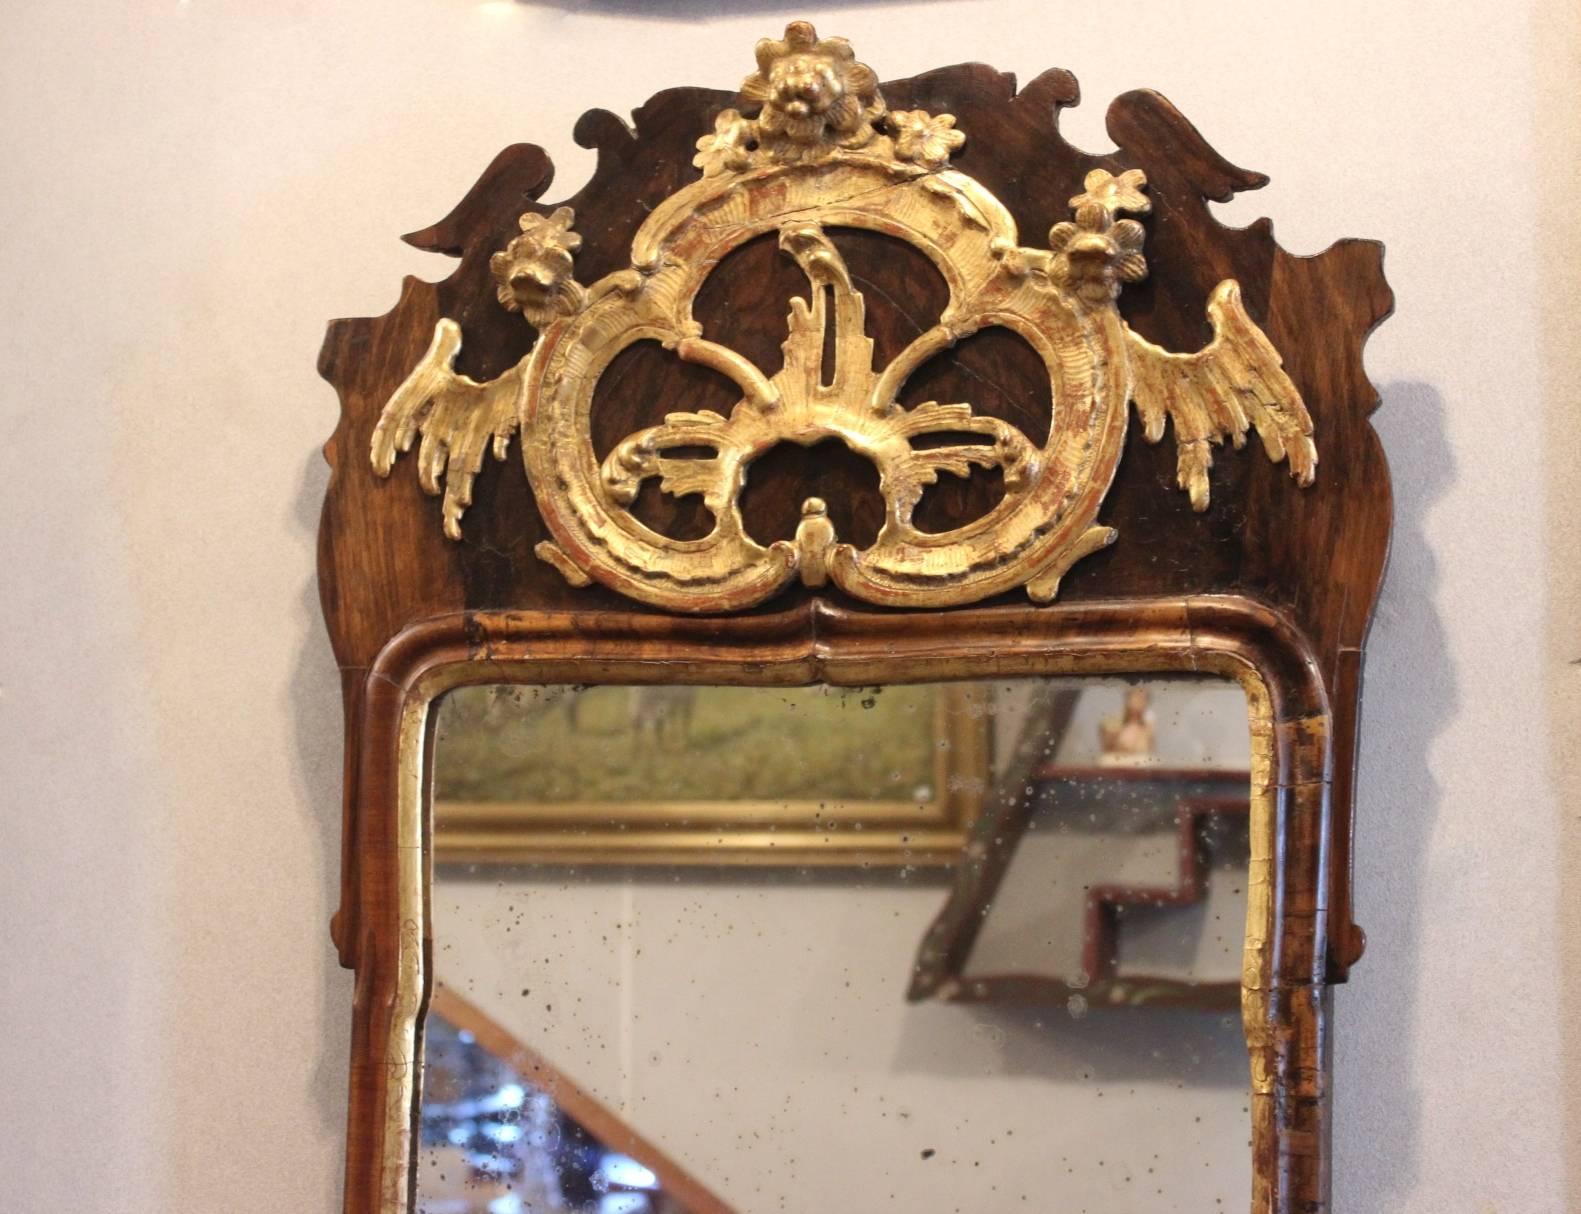 A Rococo-style mirror from the 1740s in Denmark is a remarkable piece of antique furniture that reflects the intricacies of the Rococo design movement during that era.

Rococo is a highly ornamental and decorative style characterized by intricate